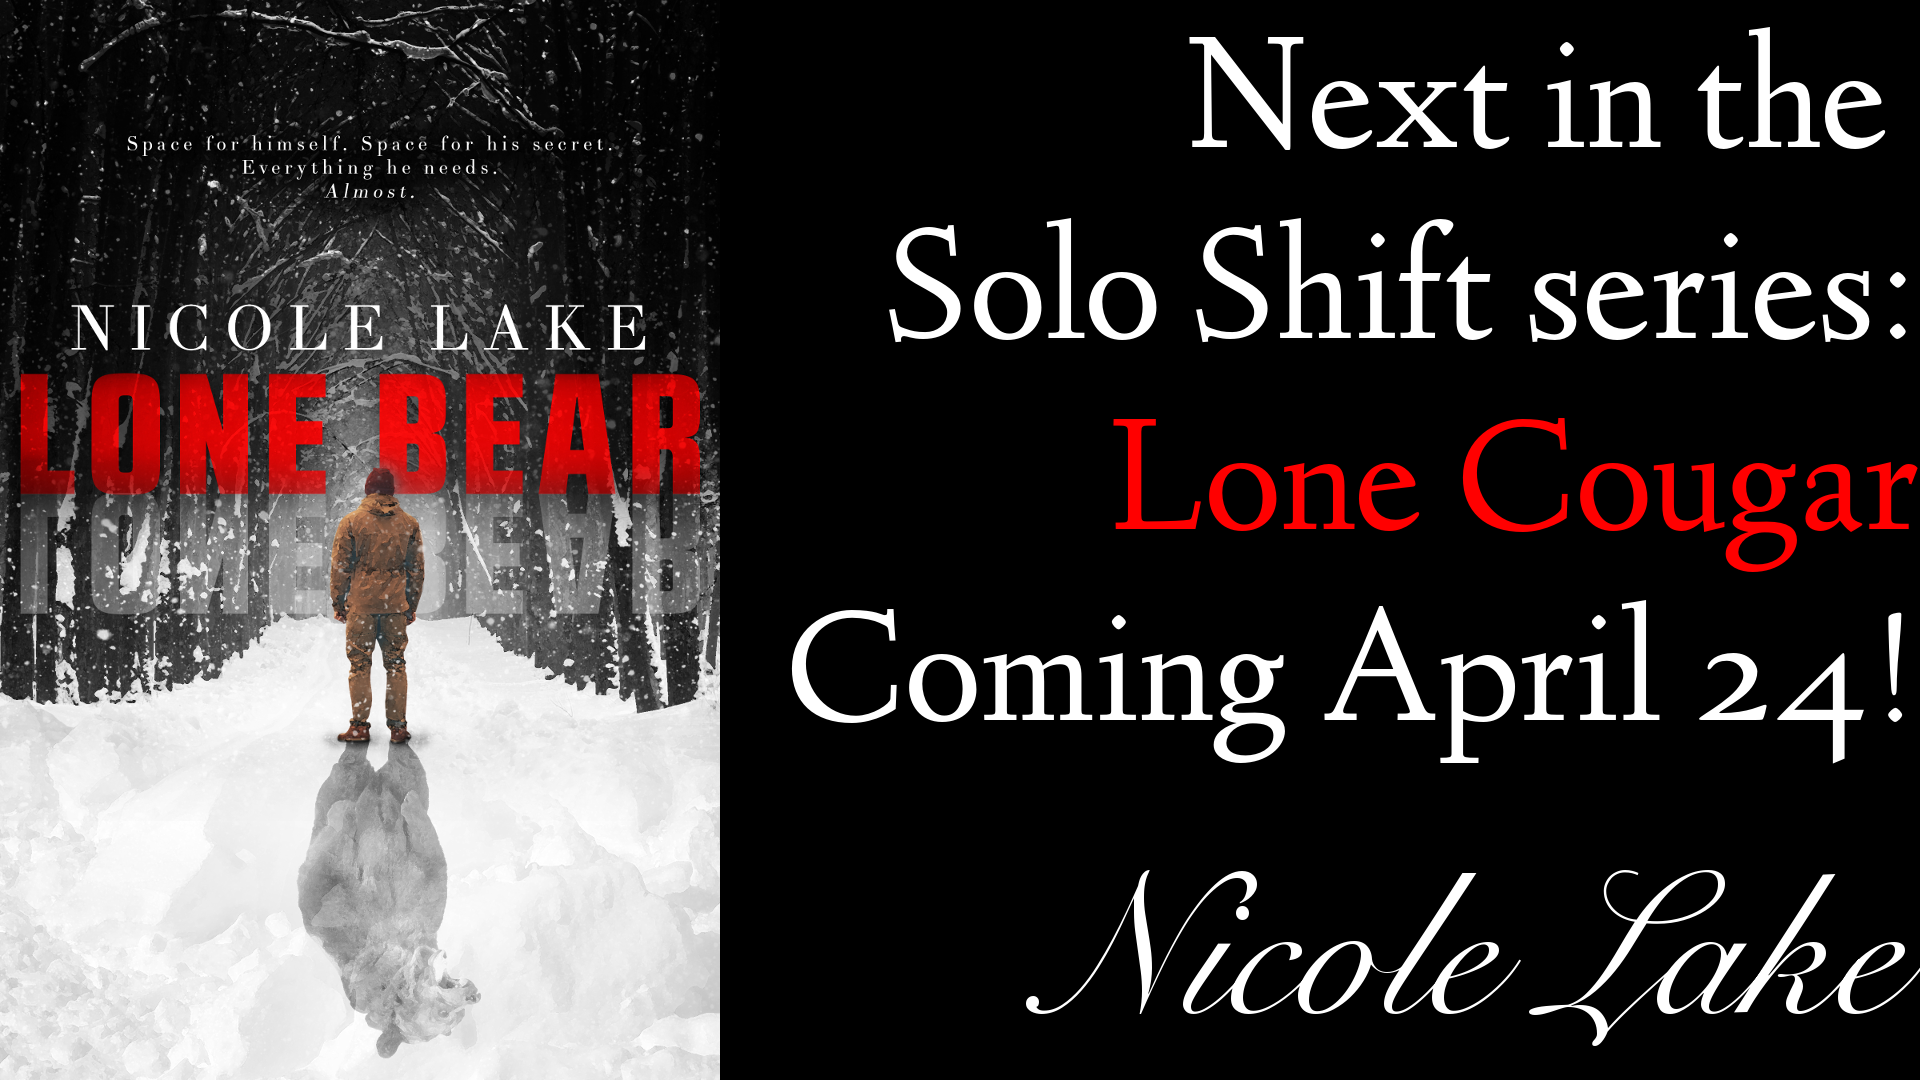 Next in the Solo Shift series: Lone Cougar, coming April 24!